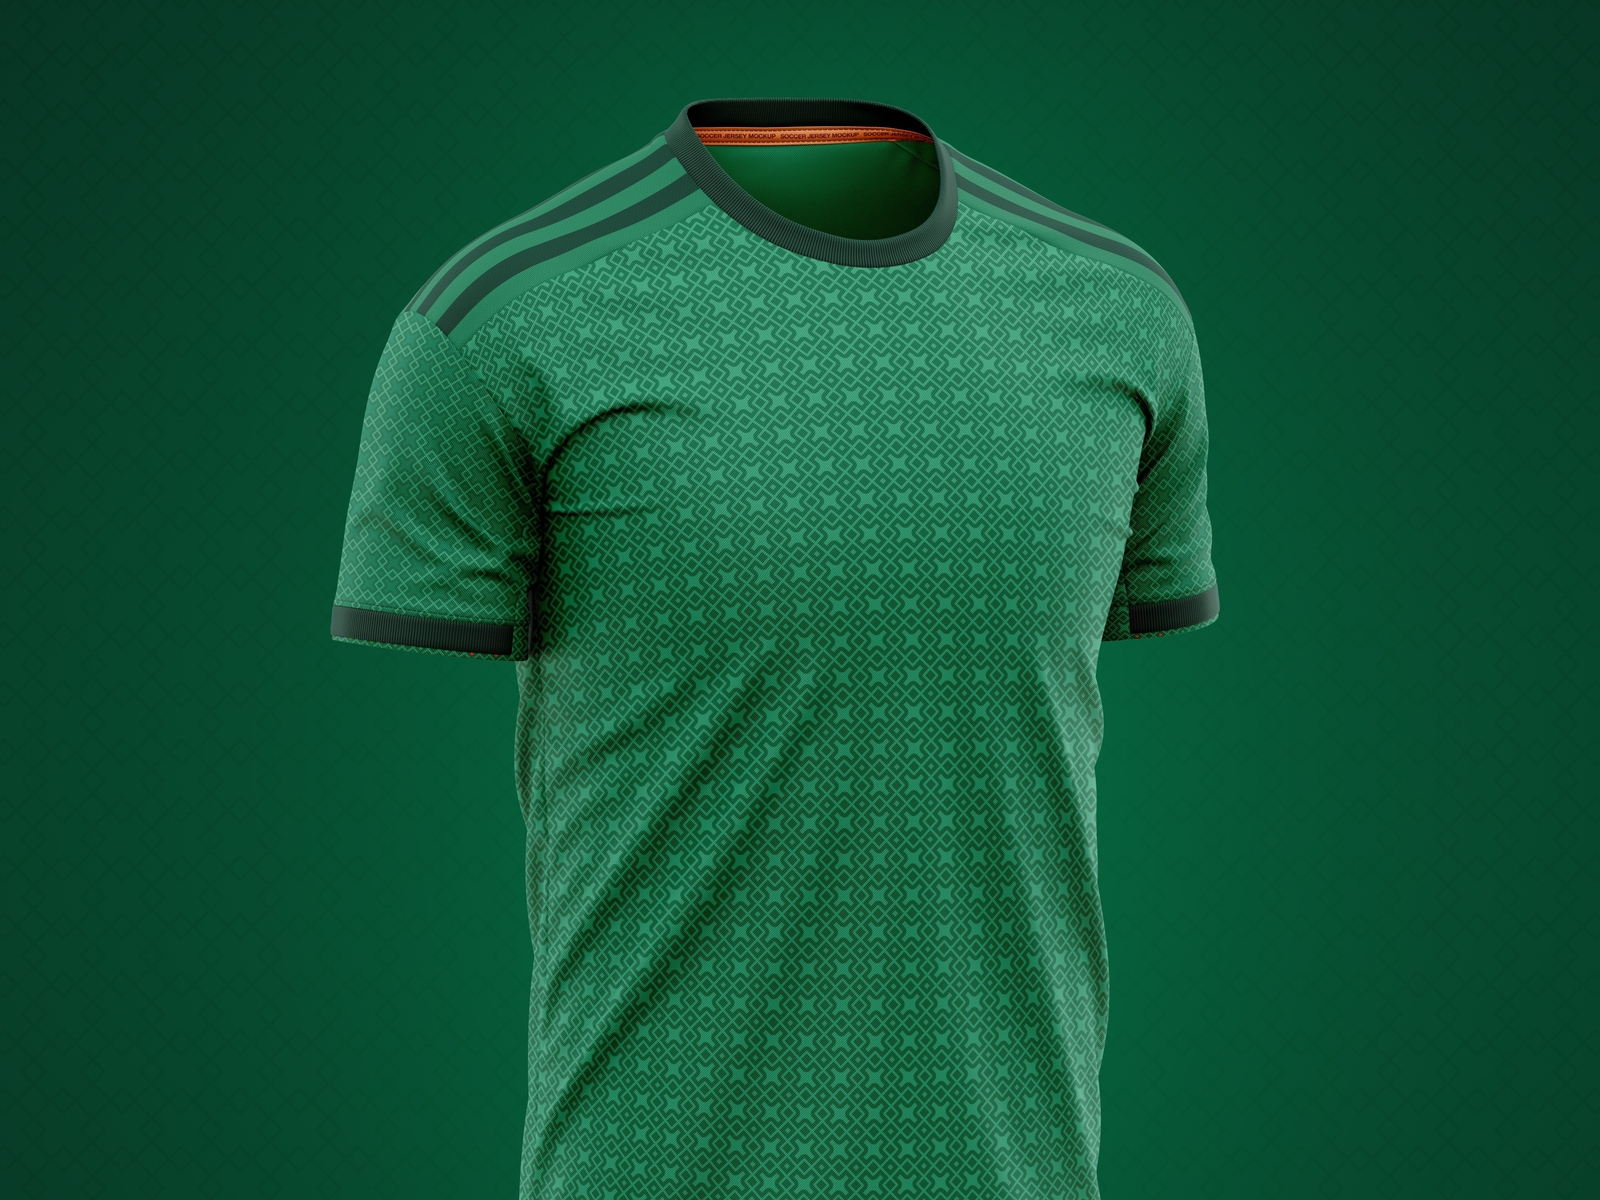 Download Soccer Jersey Mockup (2019 - 2020 Season) by CG Tailor on Dribbble